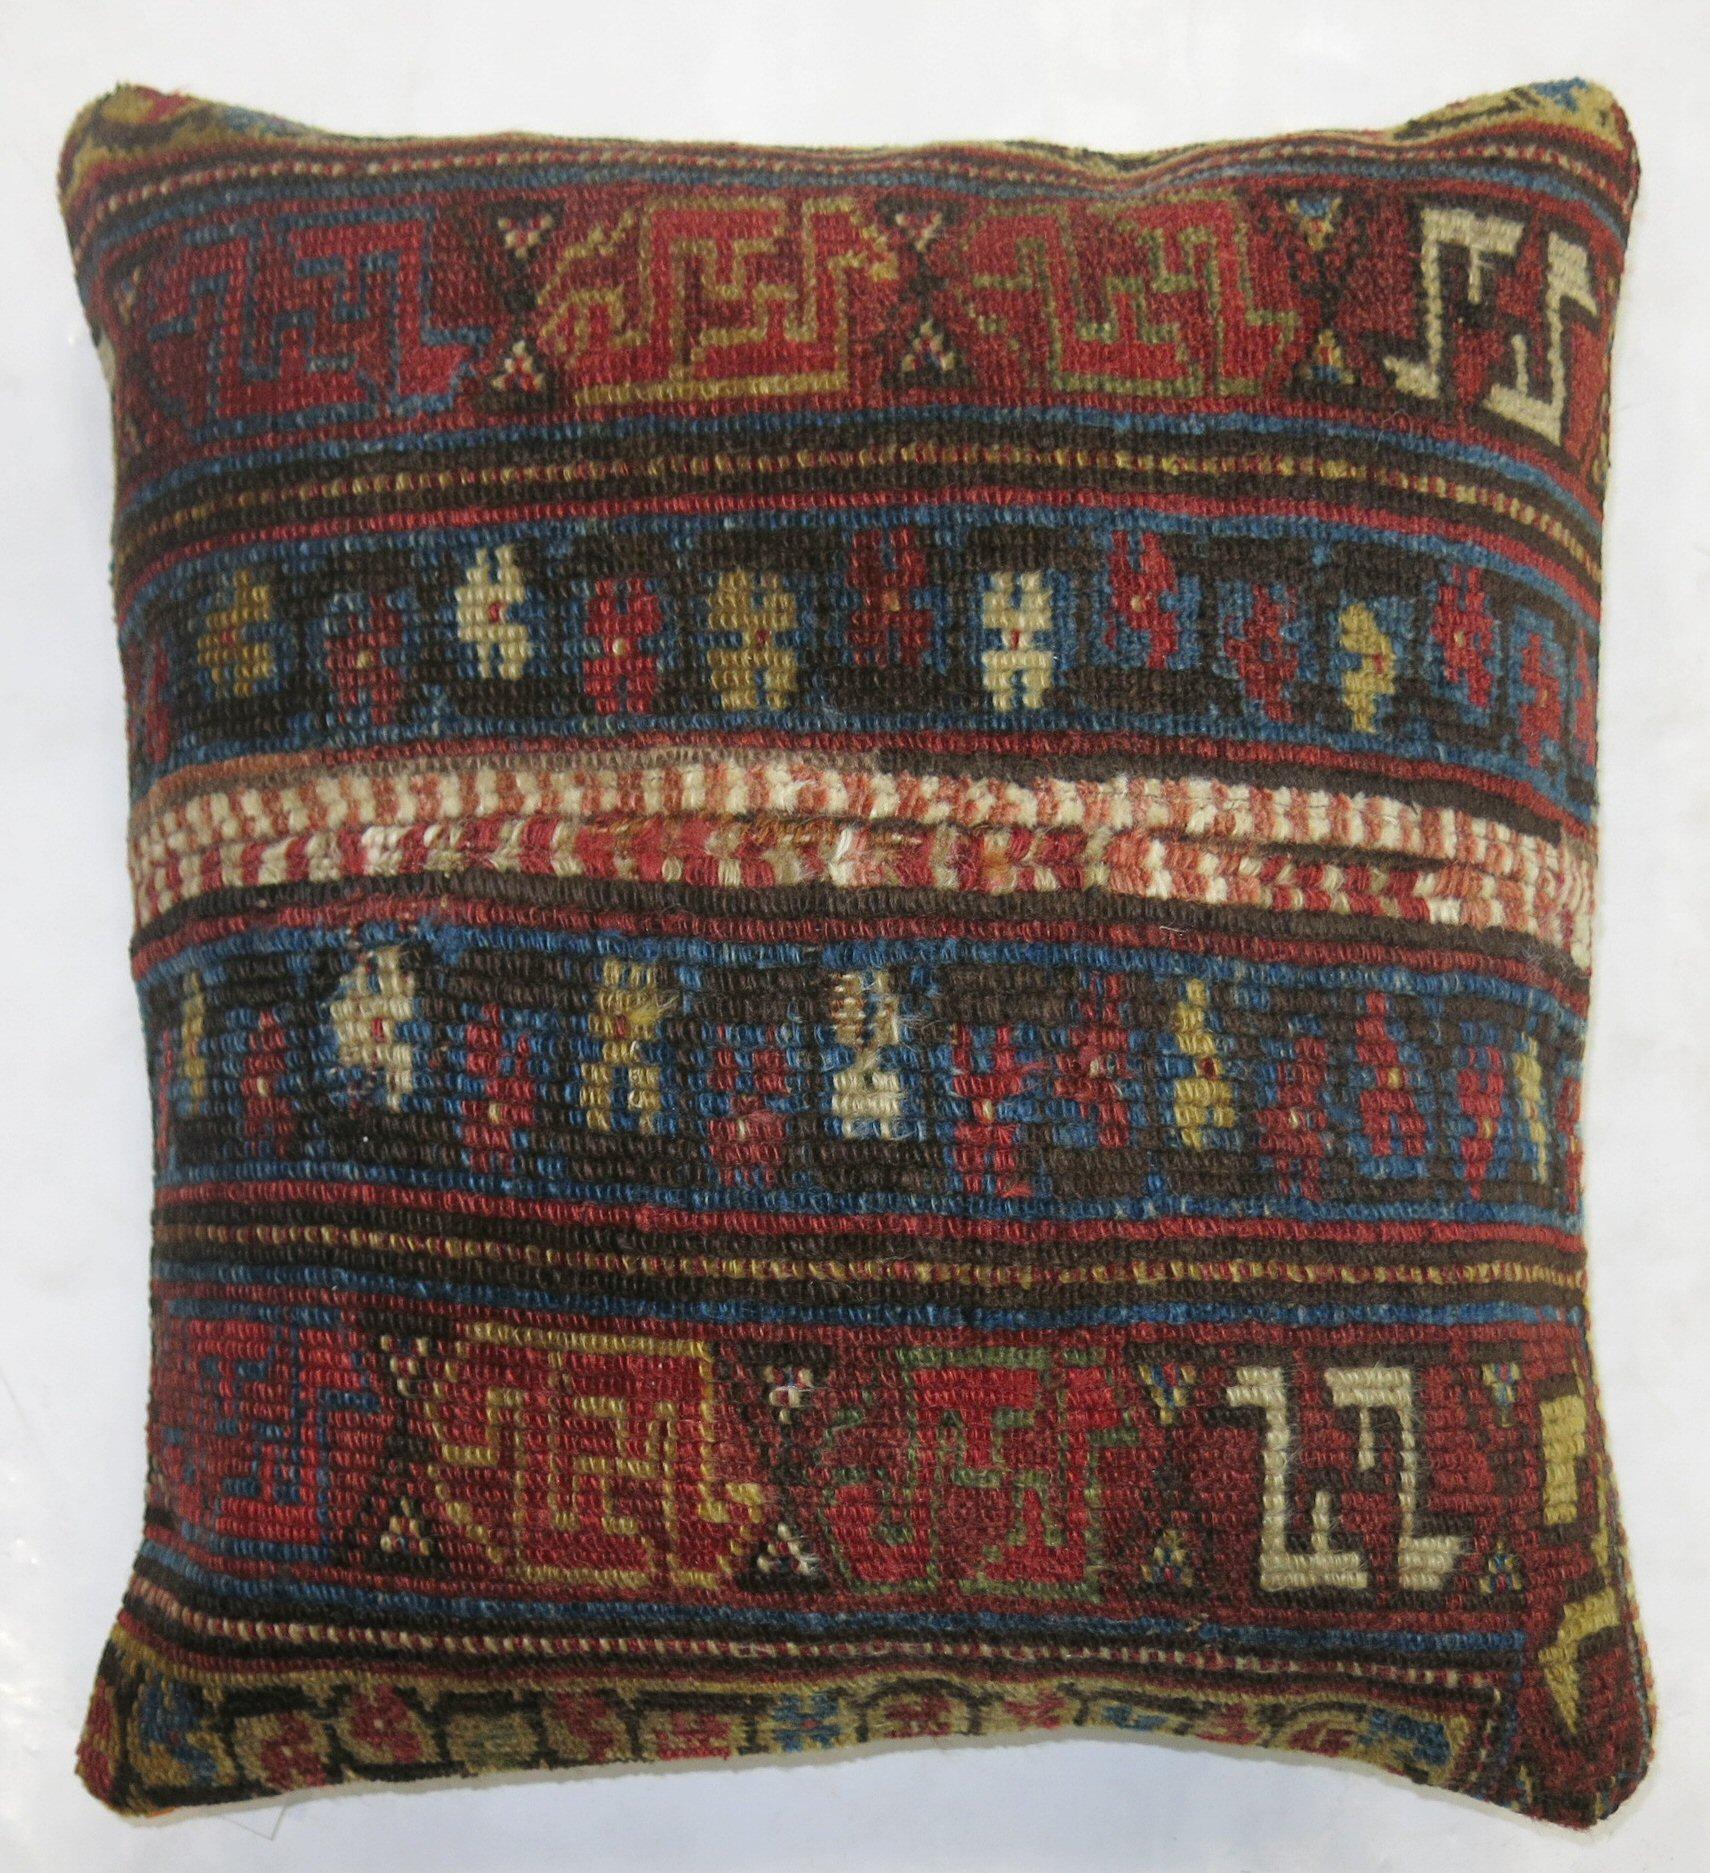 Pillow made from an early 20th century Persian rug.

Measures: 18